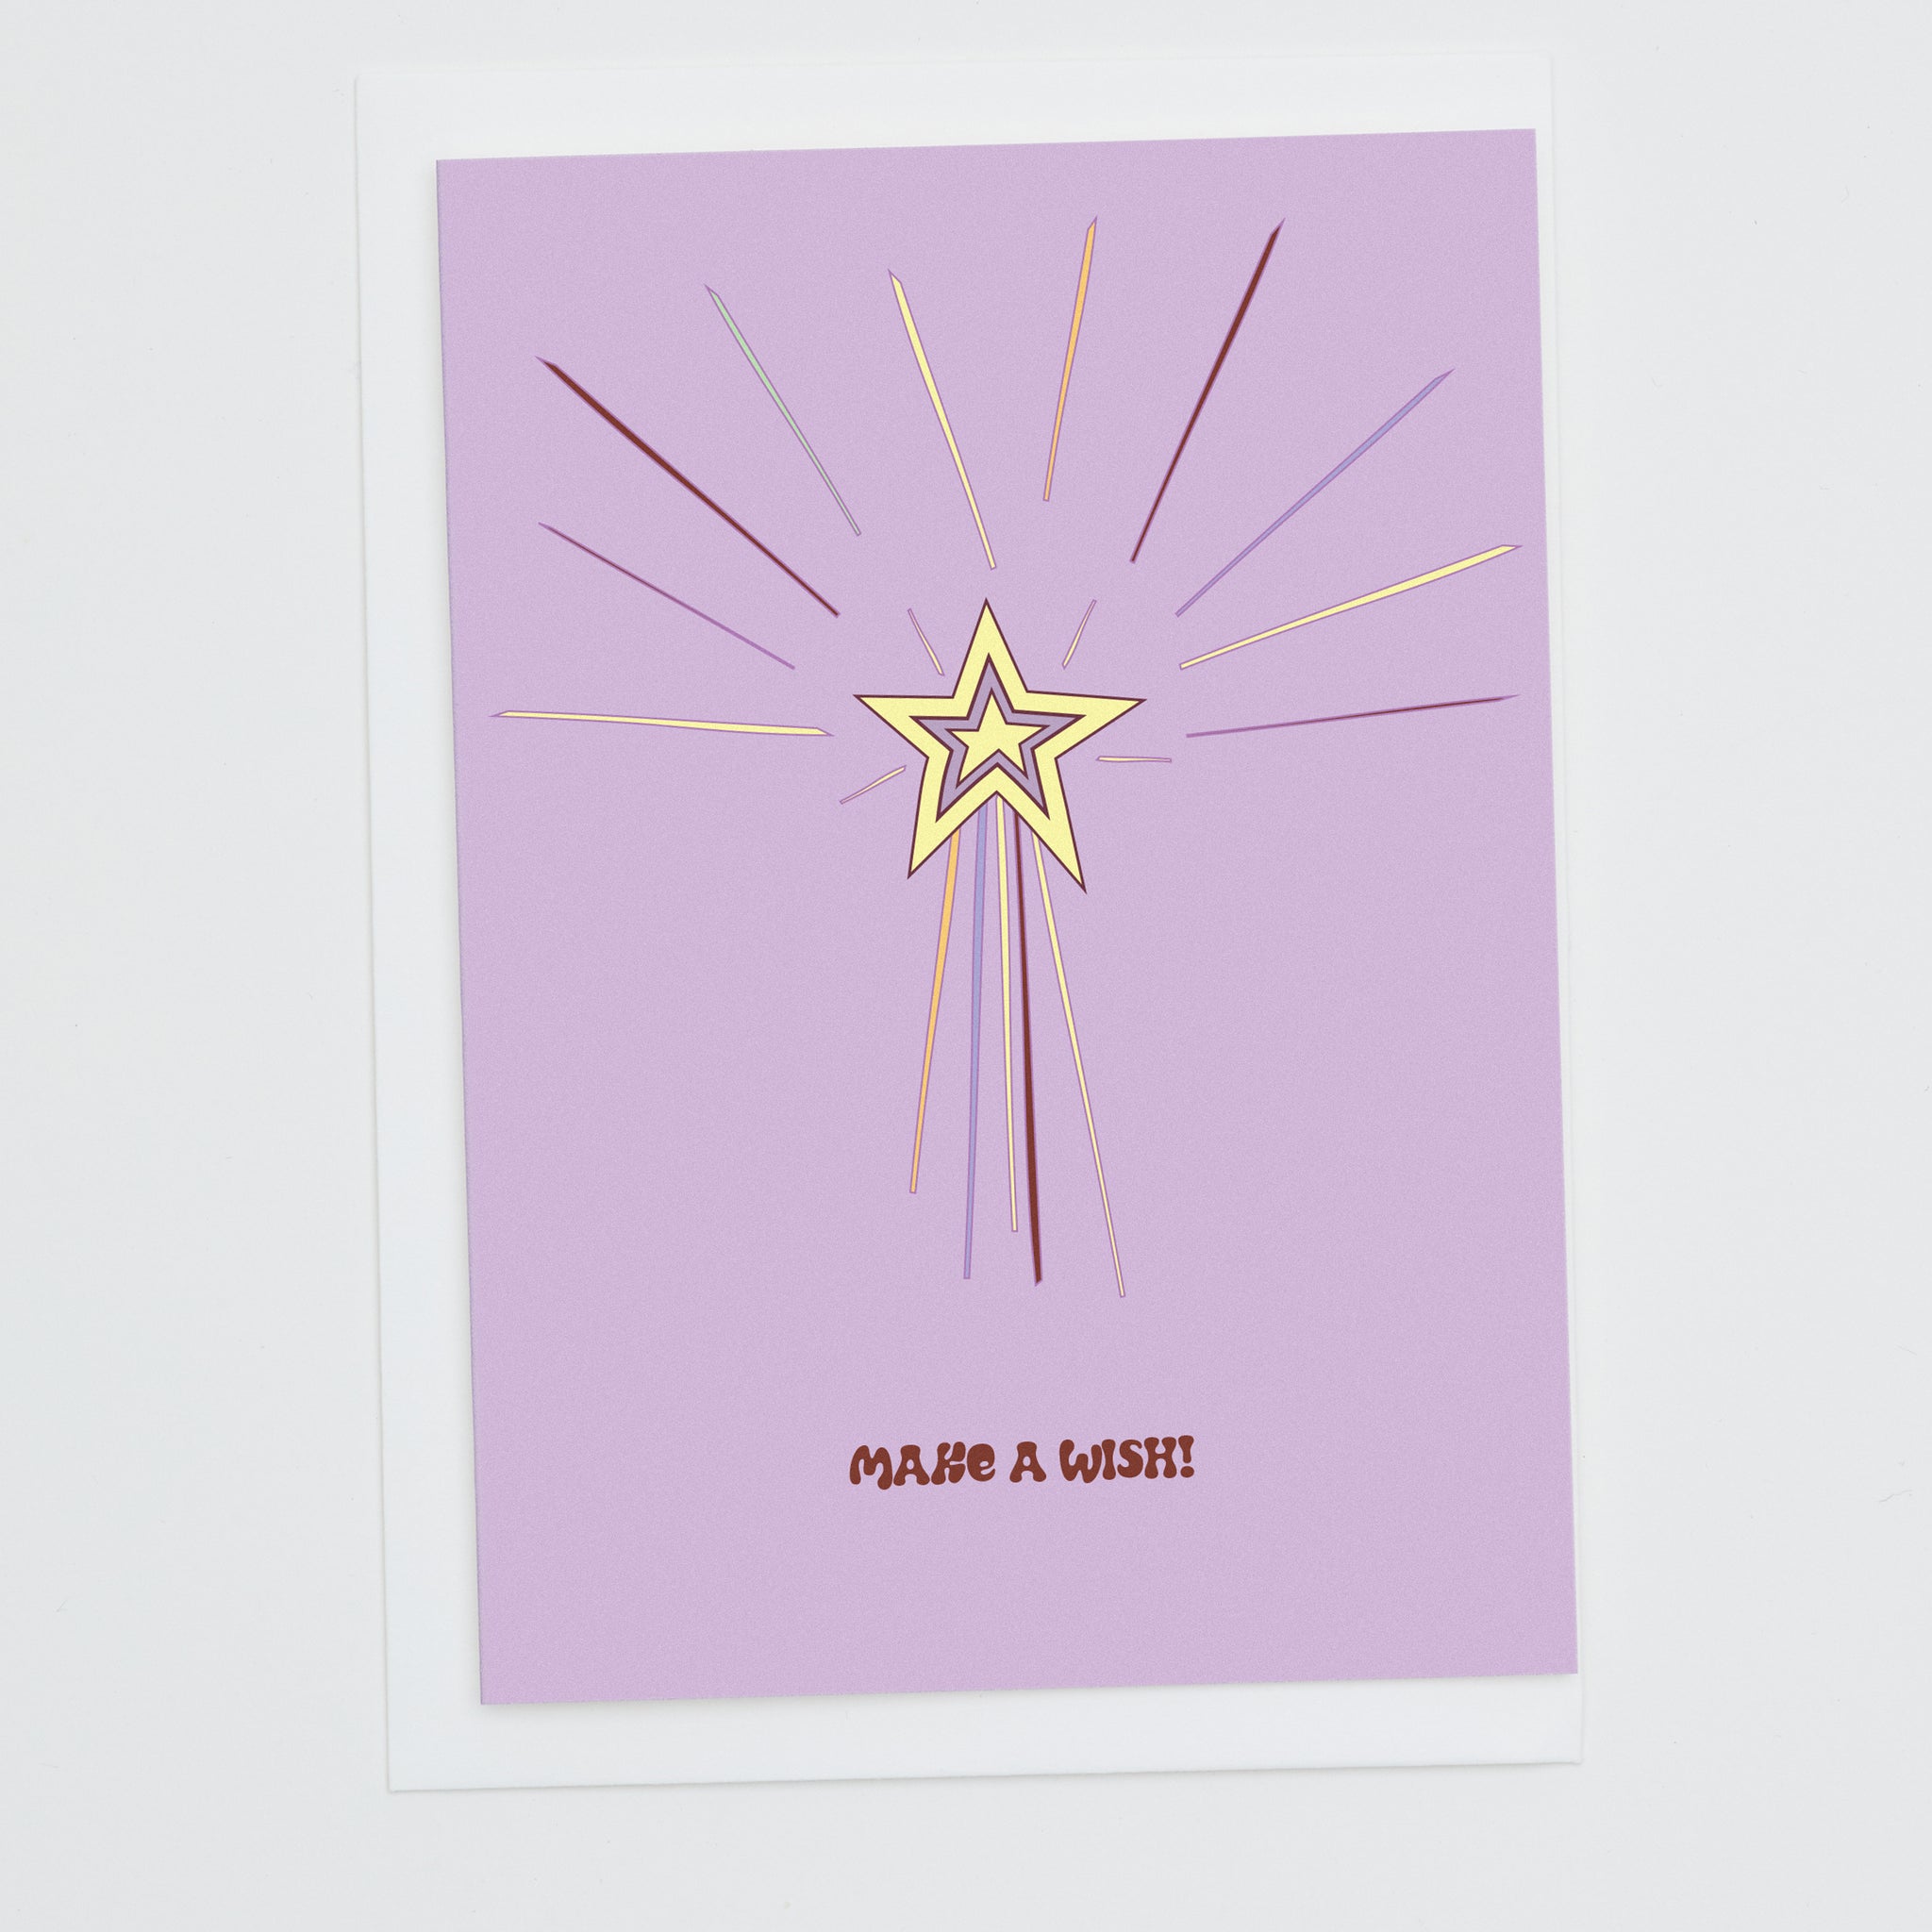 Shooting Star "Make a Wish" Greeting Card | Designed and made in Australia by Merri Cards